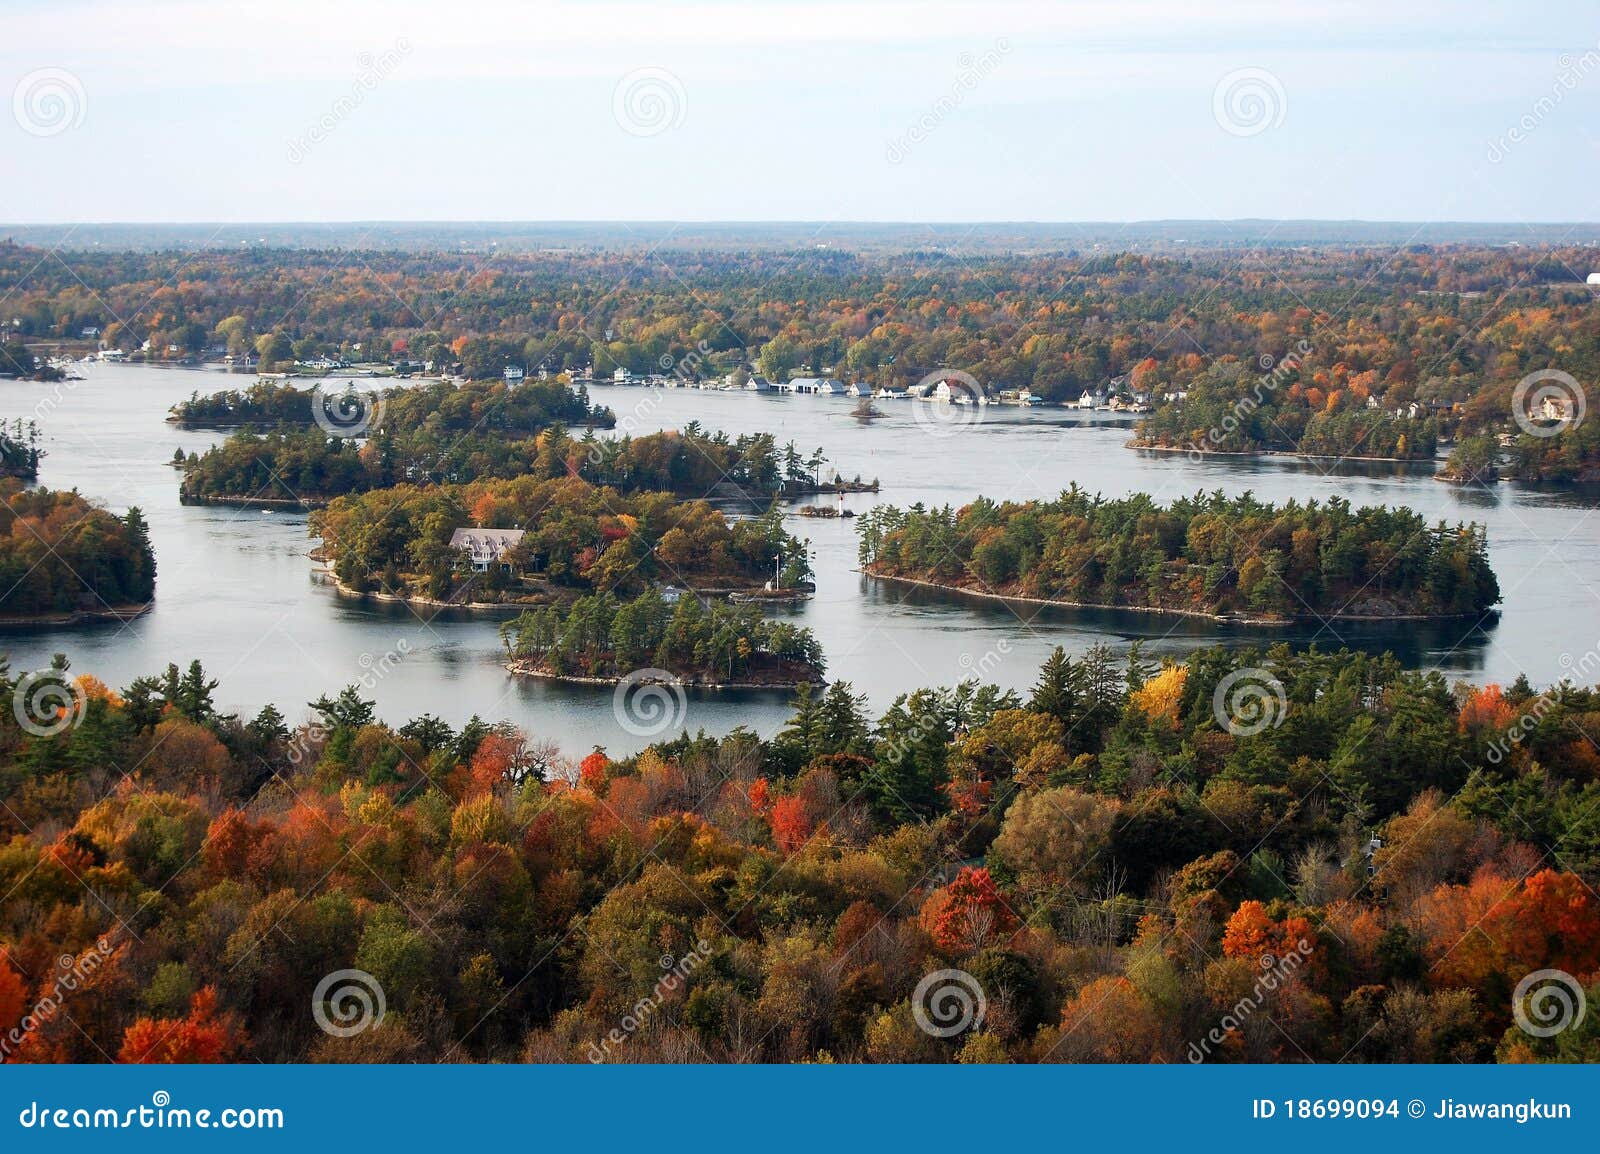 aerial view of thousand islands in fall, new york, usa